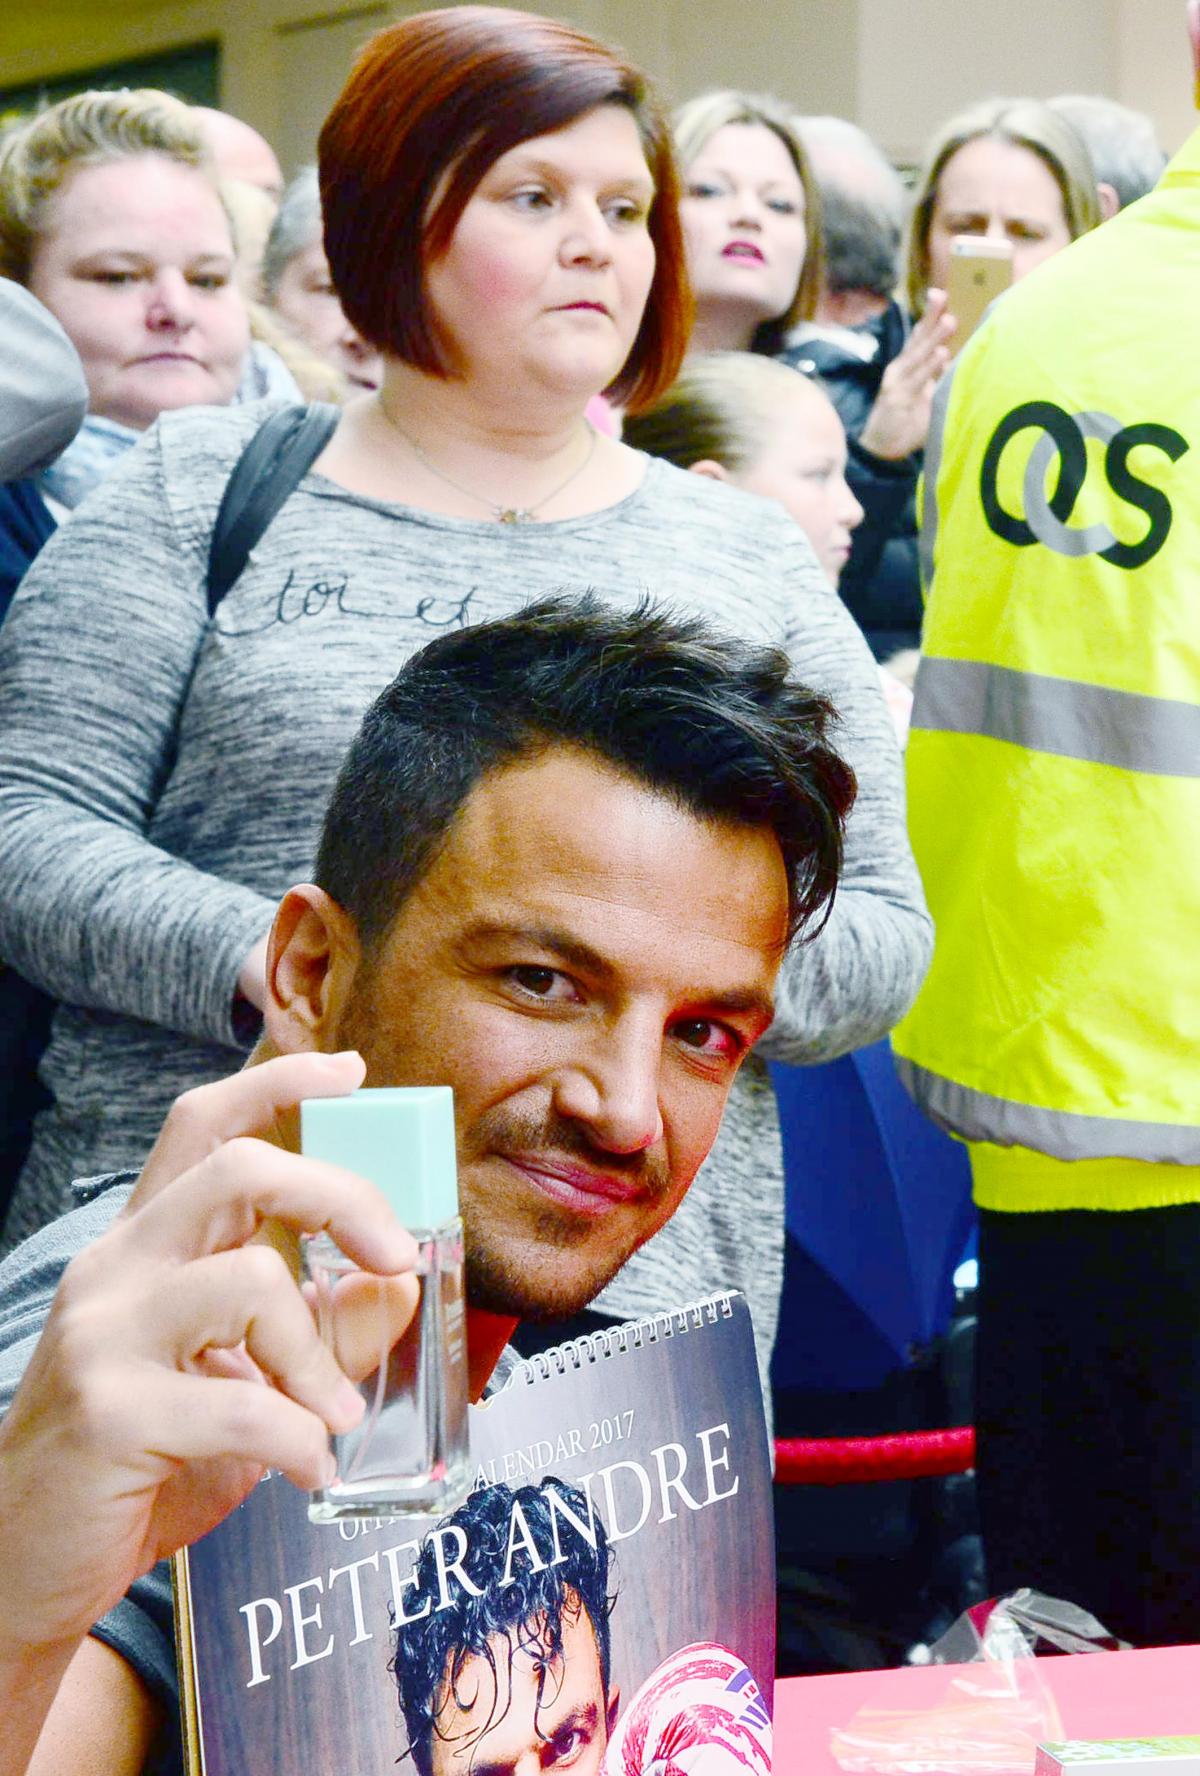 Peter Andre in Taunton